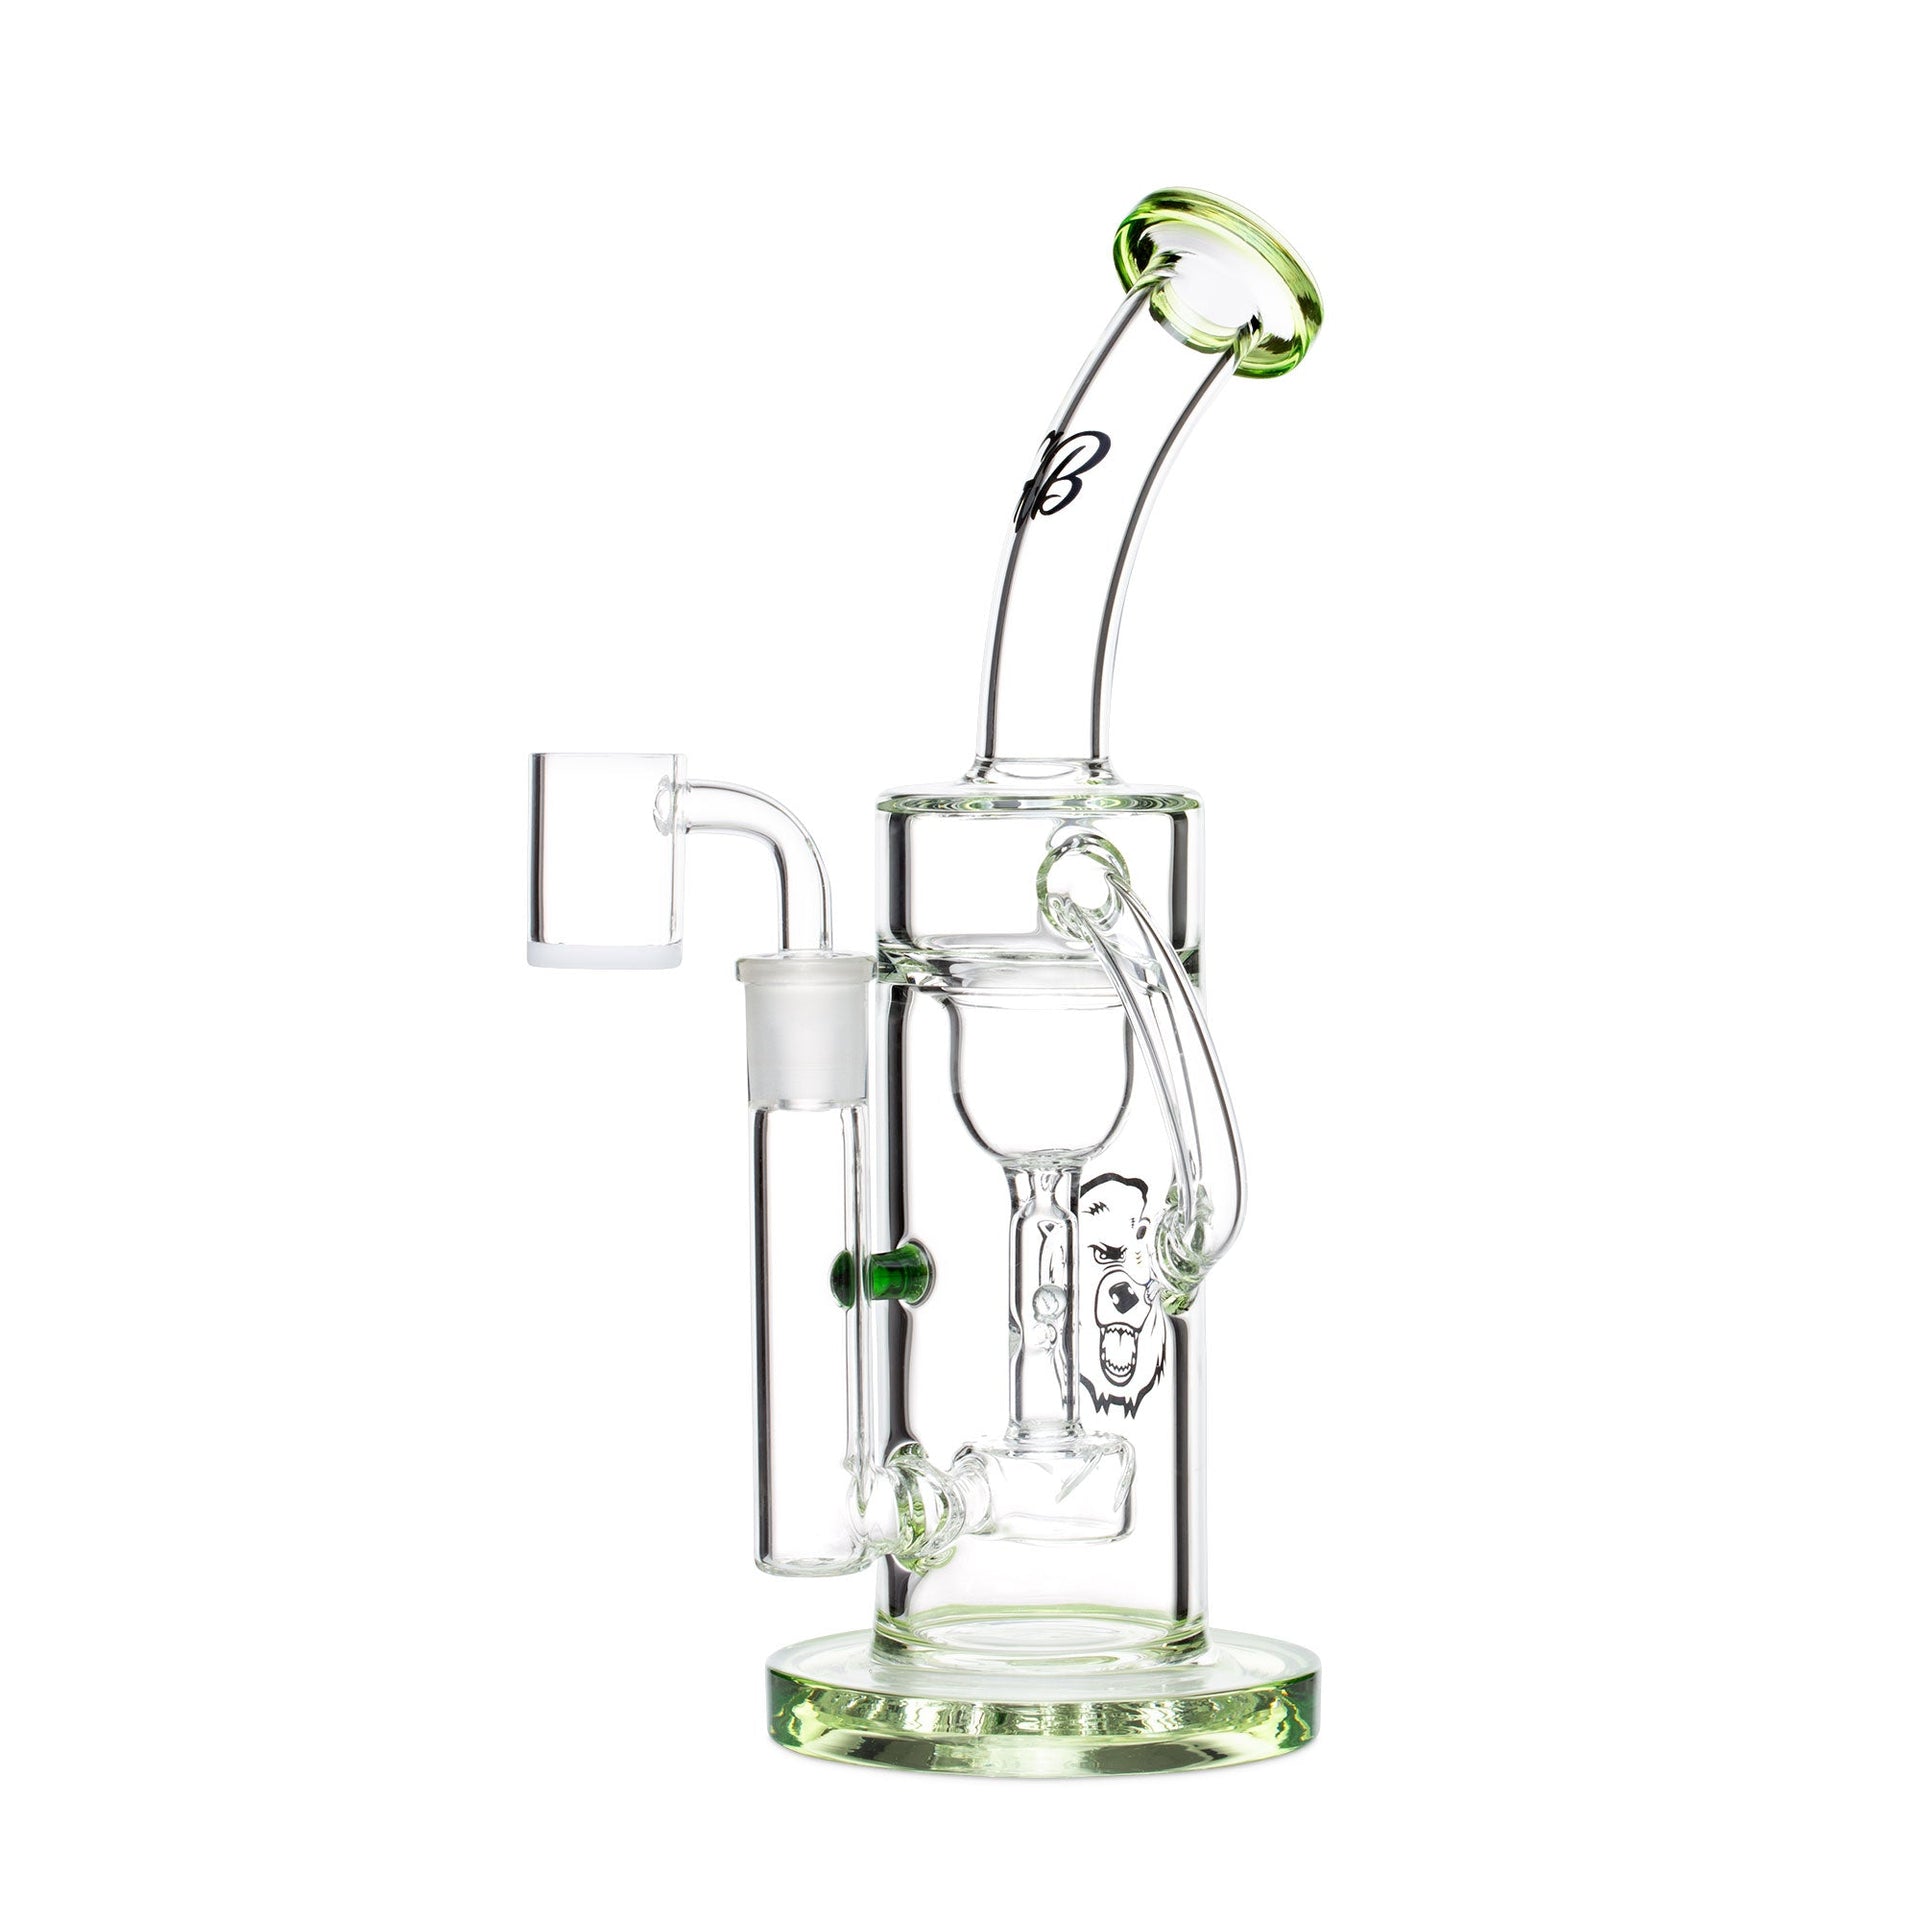 Green Bear Valve Klein Incycler Dab Rig / $ 89.99 at Science